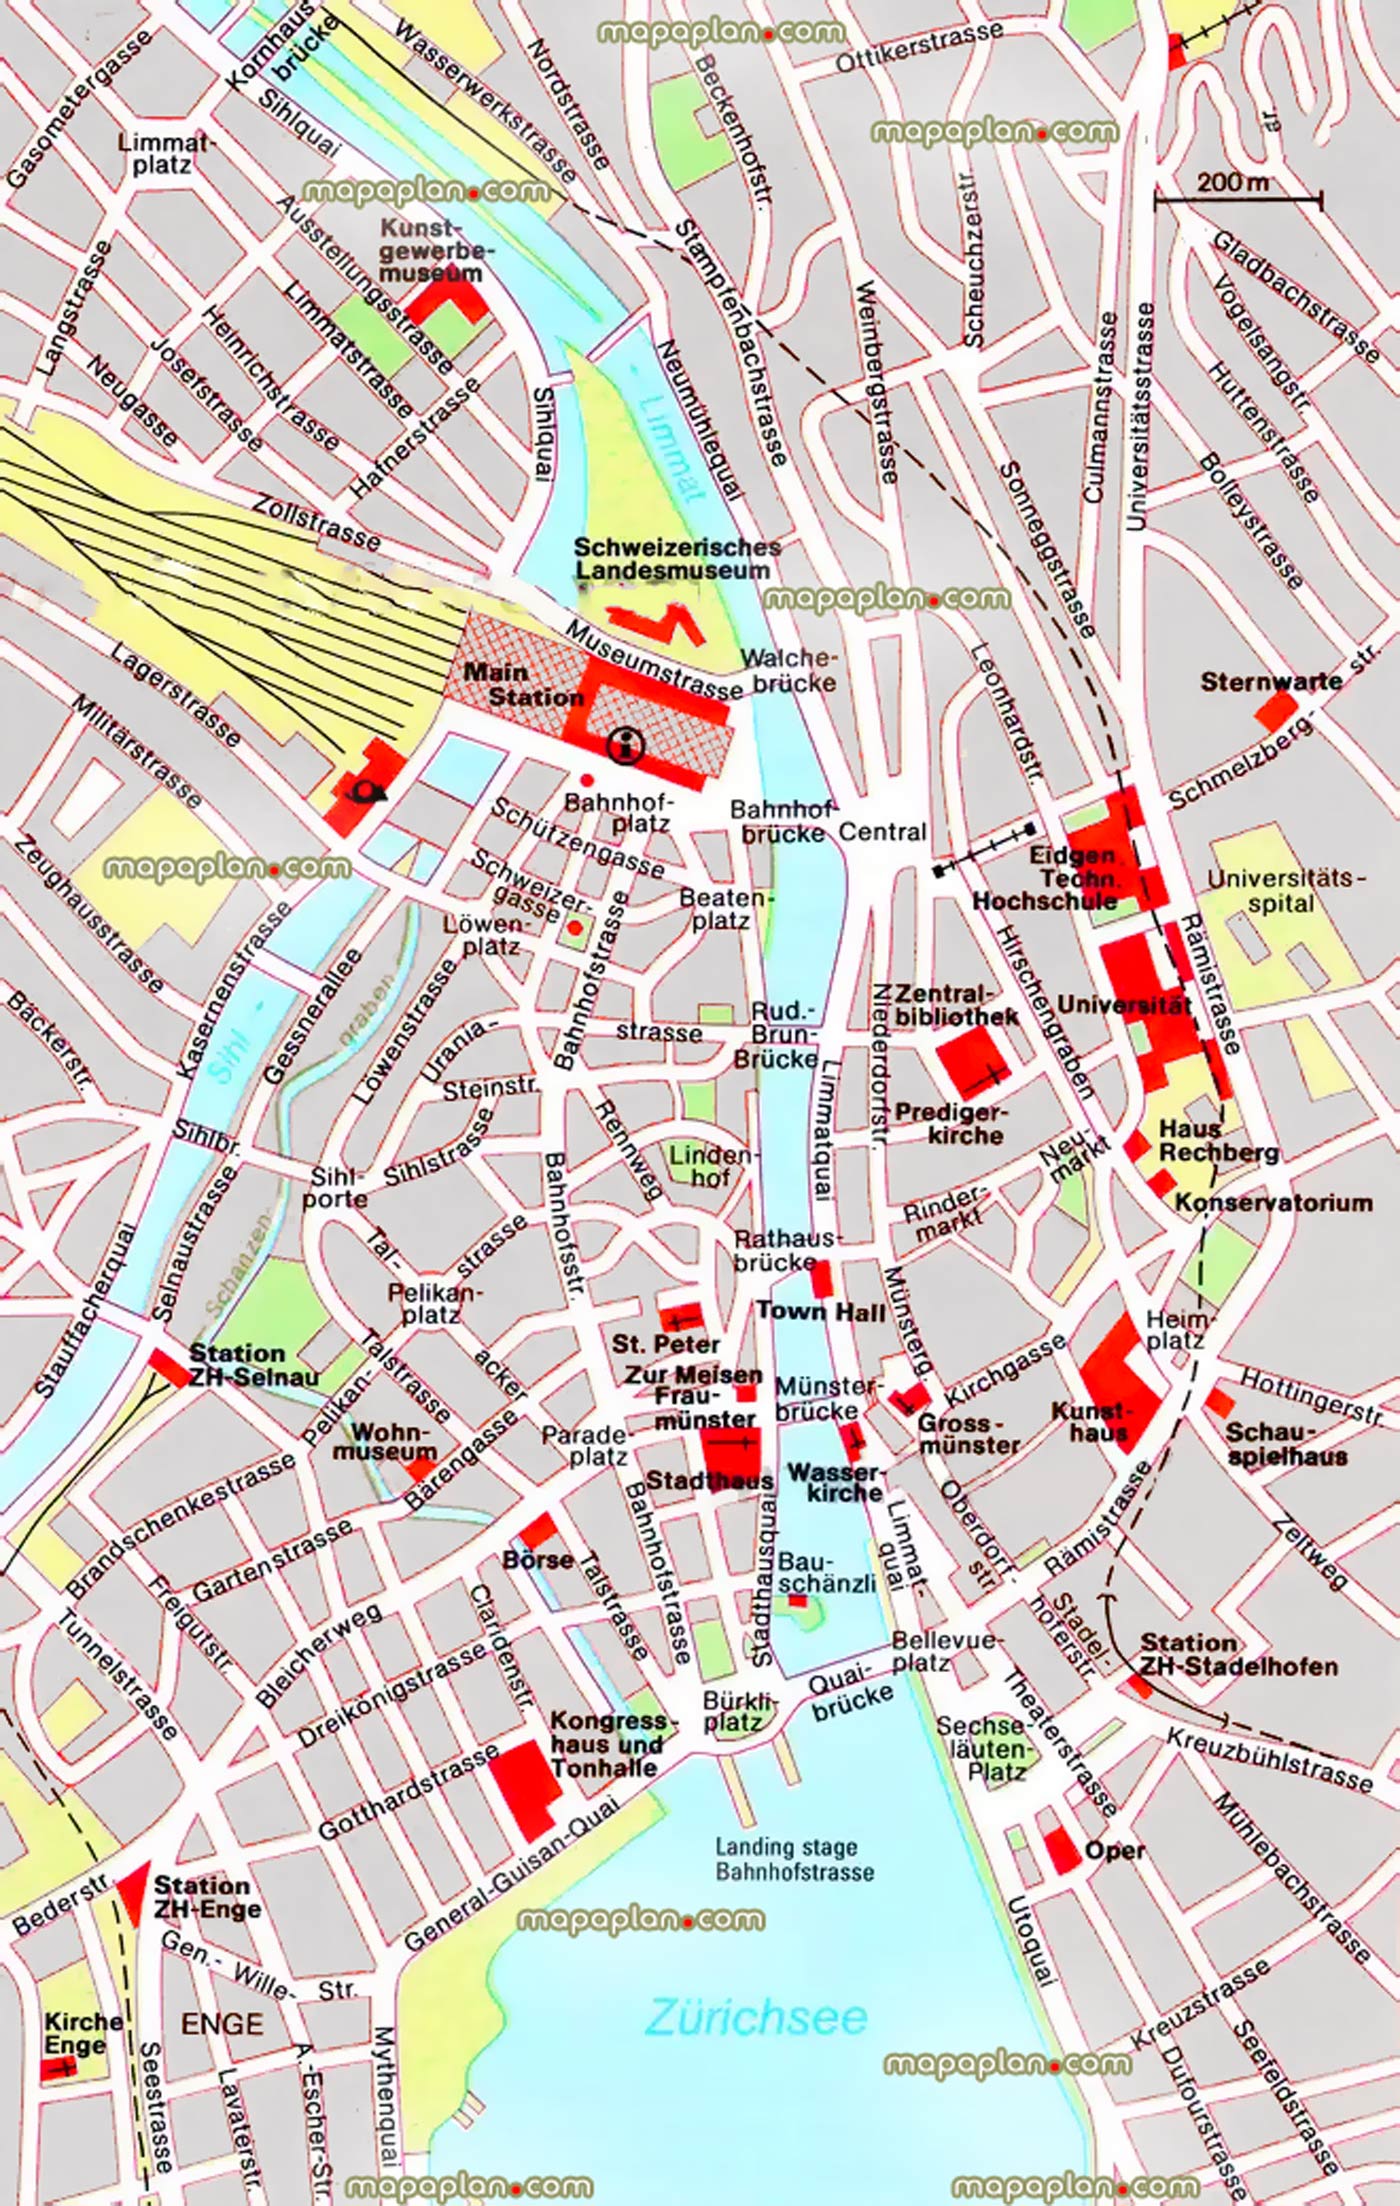 zurich city center offline 3d interactive guide jpg main streets tourist information centre sightseeing downtown attractions main train railway station interactive walking trip downloadable itinerary planner print guide best destinations visit central district area outline layout best locationss Zurich Top tourist attractions map